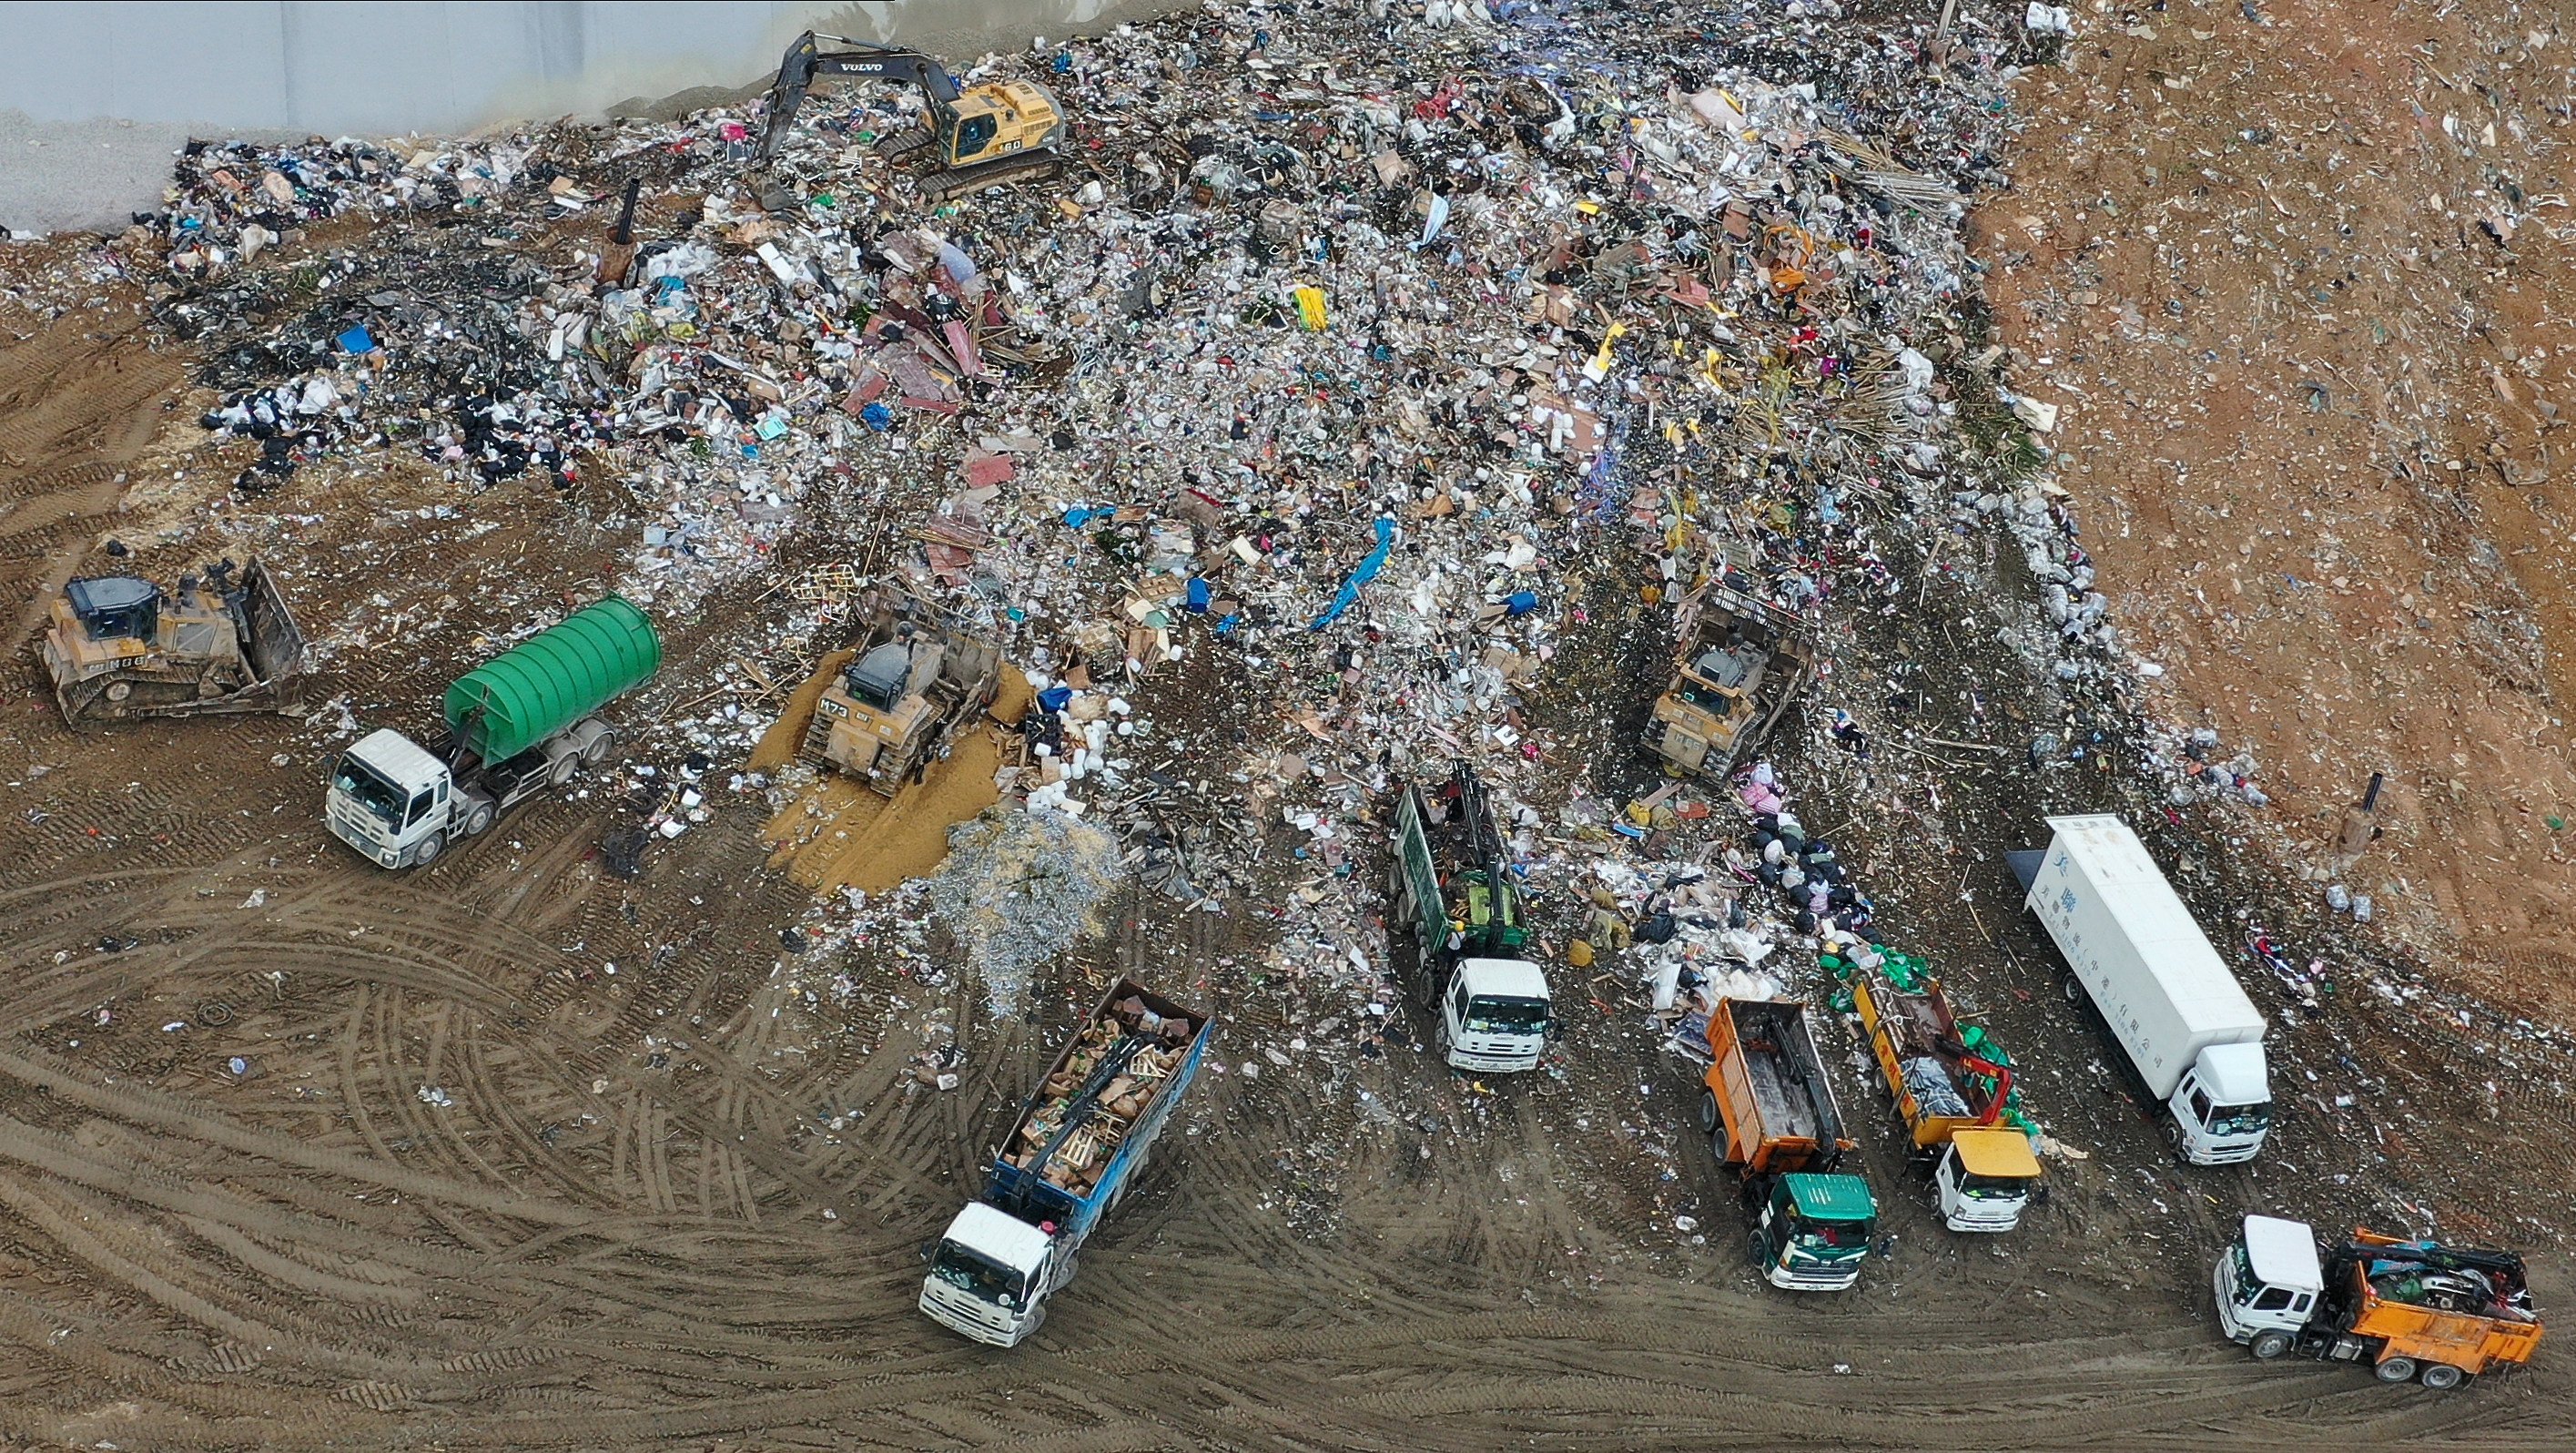 Part of North East New Territories landfill, in Ta Kwu Ling, is seen from the air on August 14, 2020. An estimated 60 tonnes of used rapid antigen test kits went into Hong Kong’s landfills every day during the Covid-19 pandemic, completely sidelining the city’s anti-plastic initiatives. Photo: Winson Wong